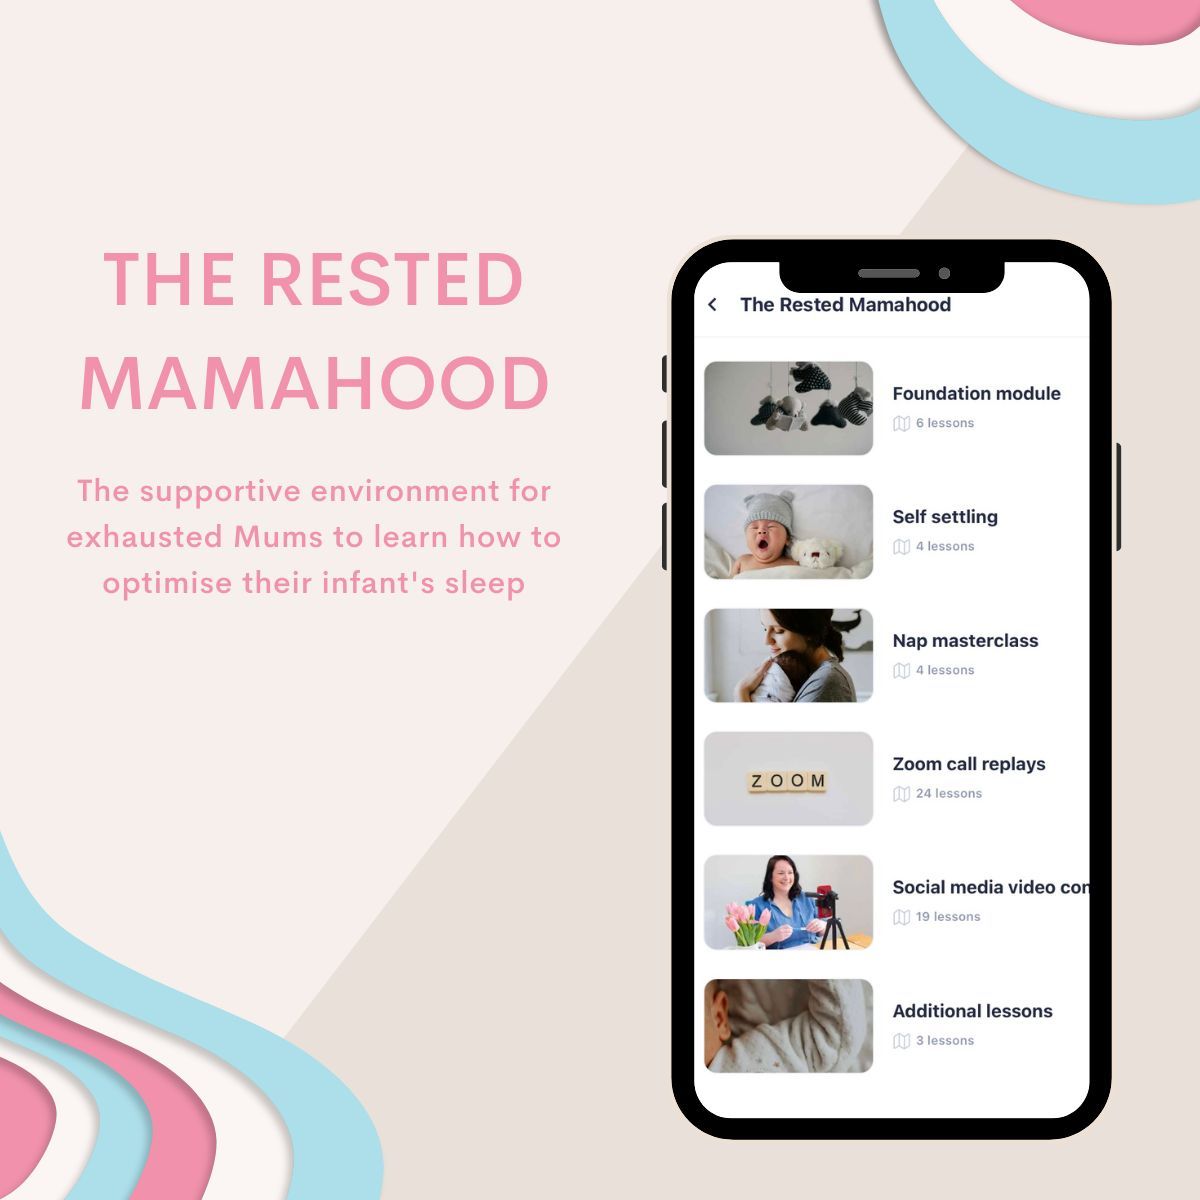 A Month’s Membership to The Rested Mamahood, worth £20